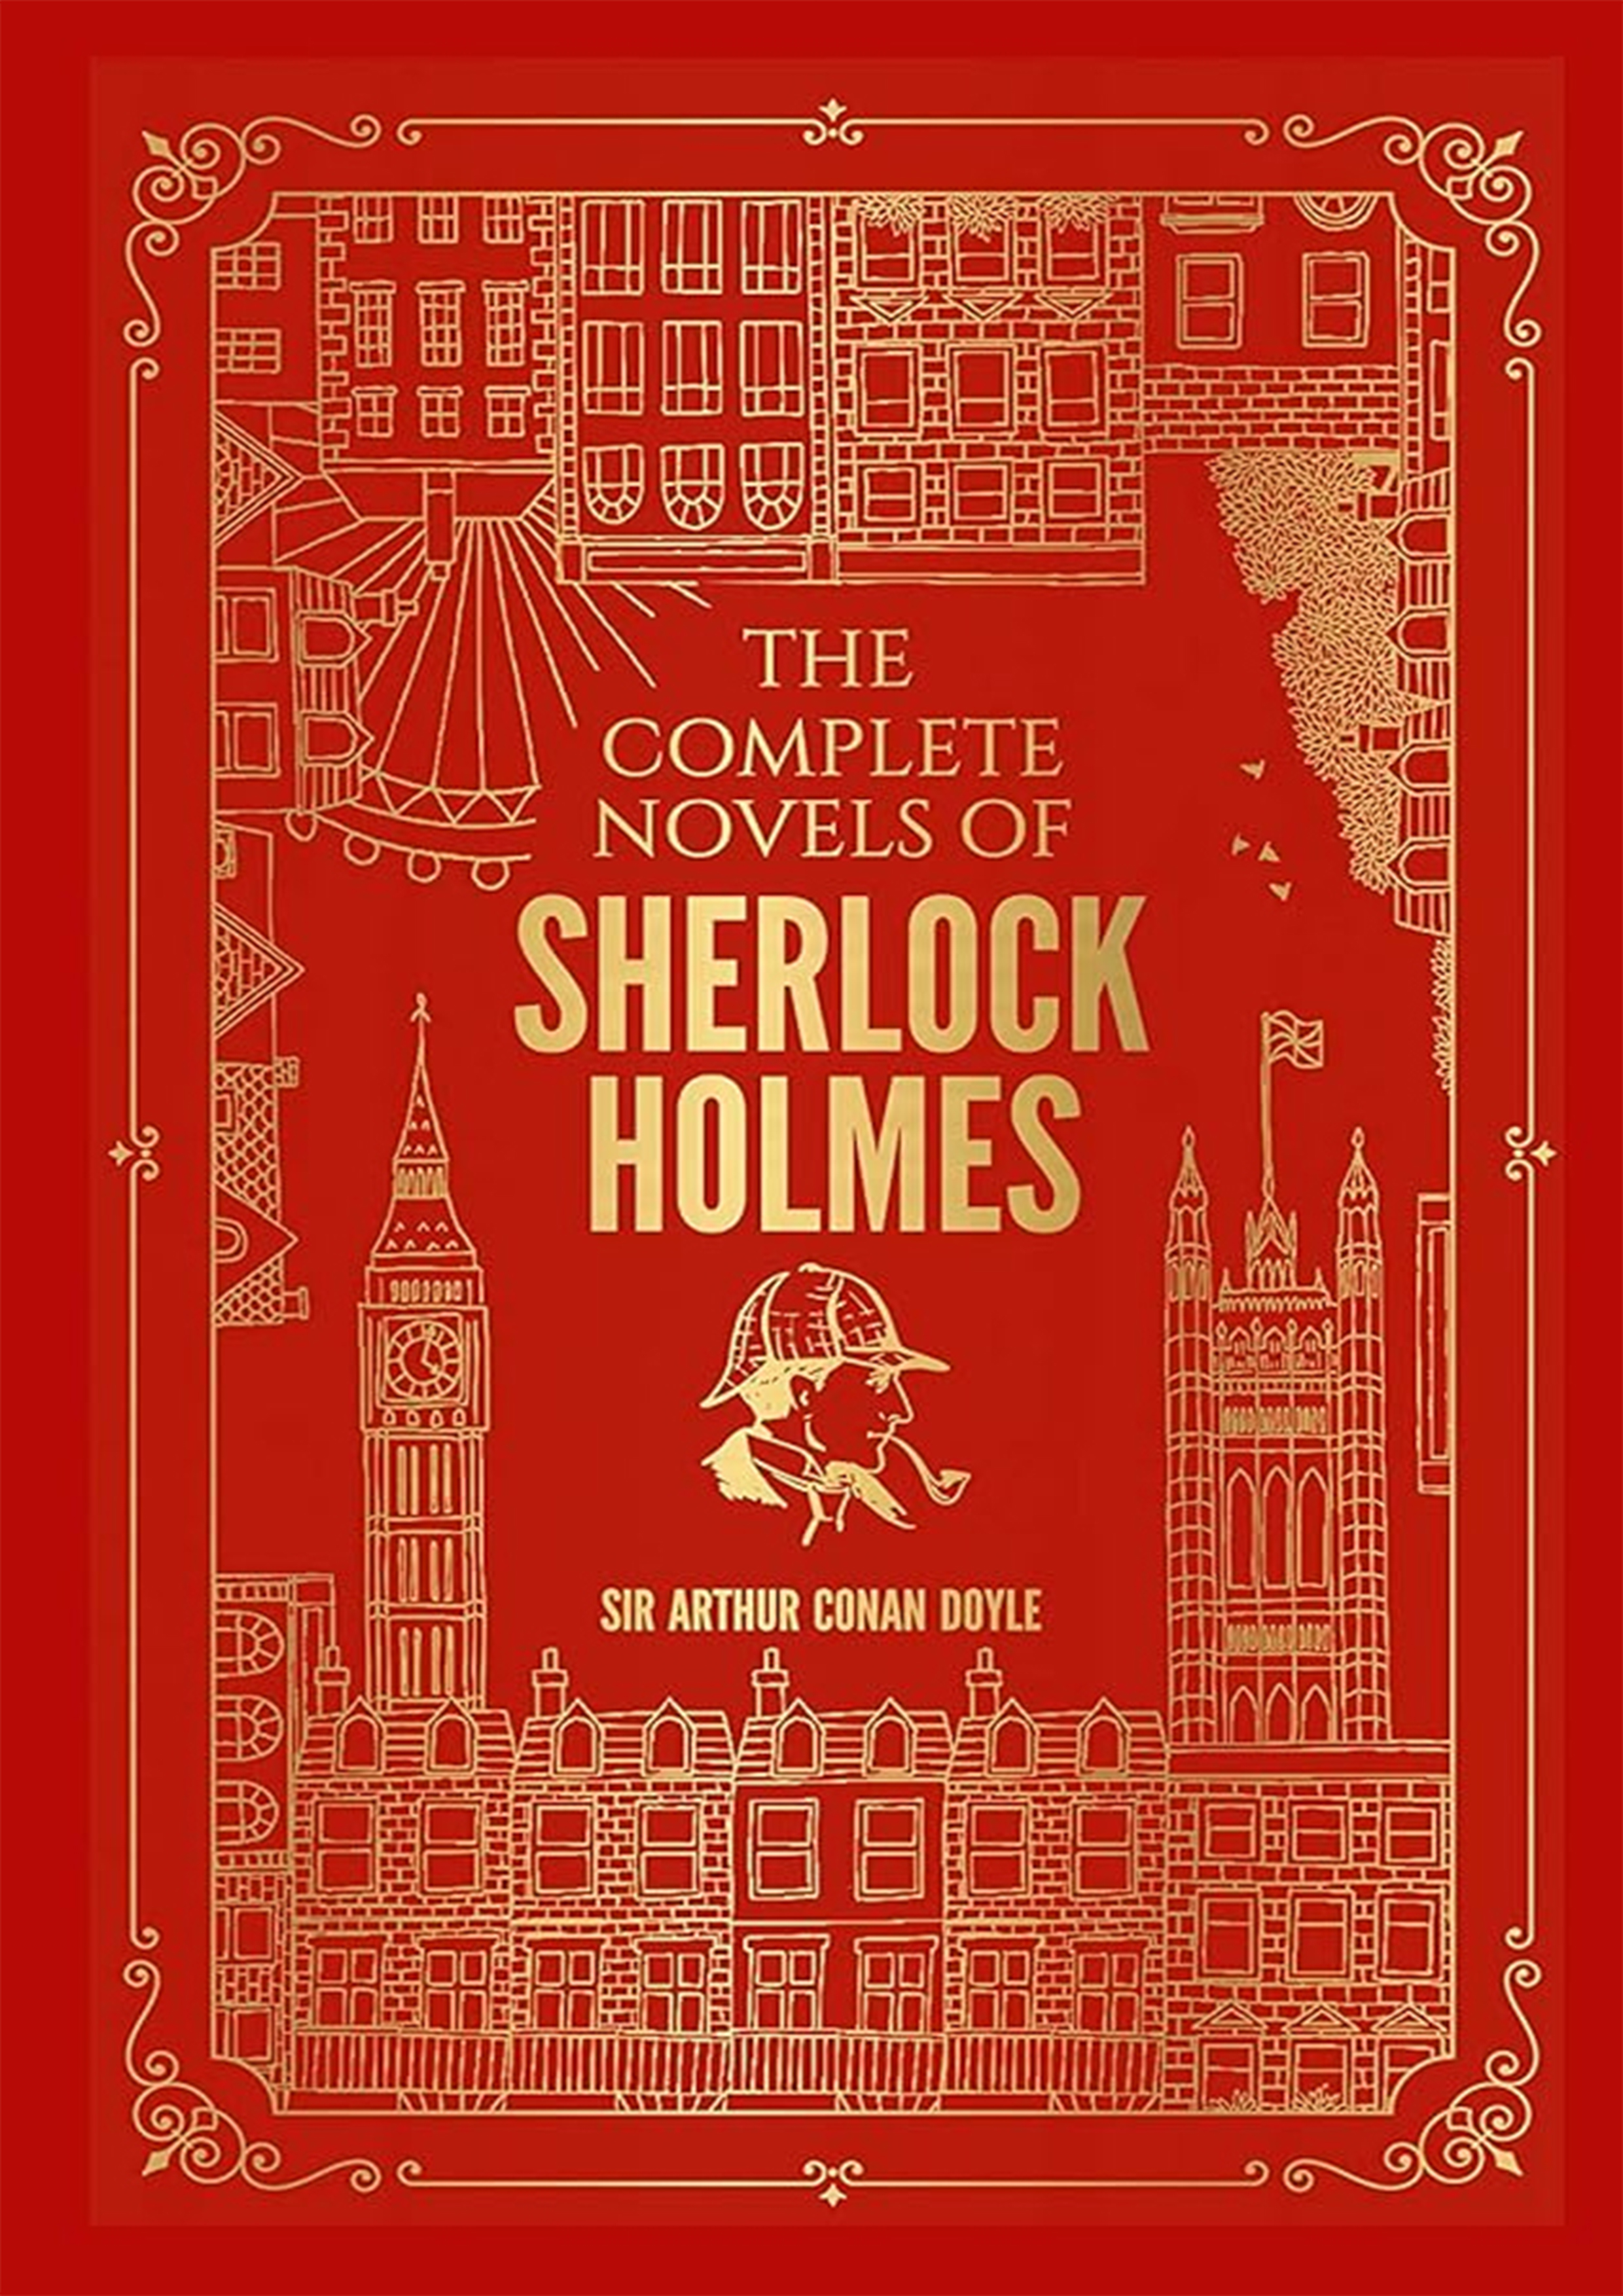 The Complete Novels of Sherlock Holmes (Deluxe Hardbound Edition) (হার্ডকভার)